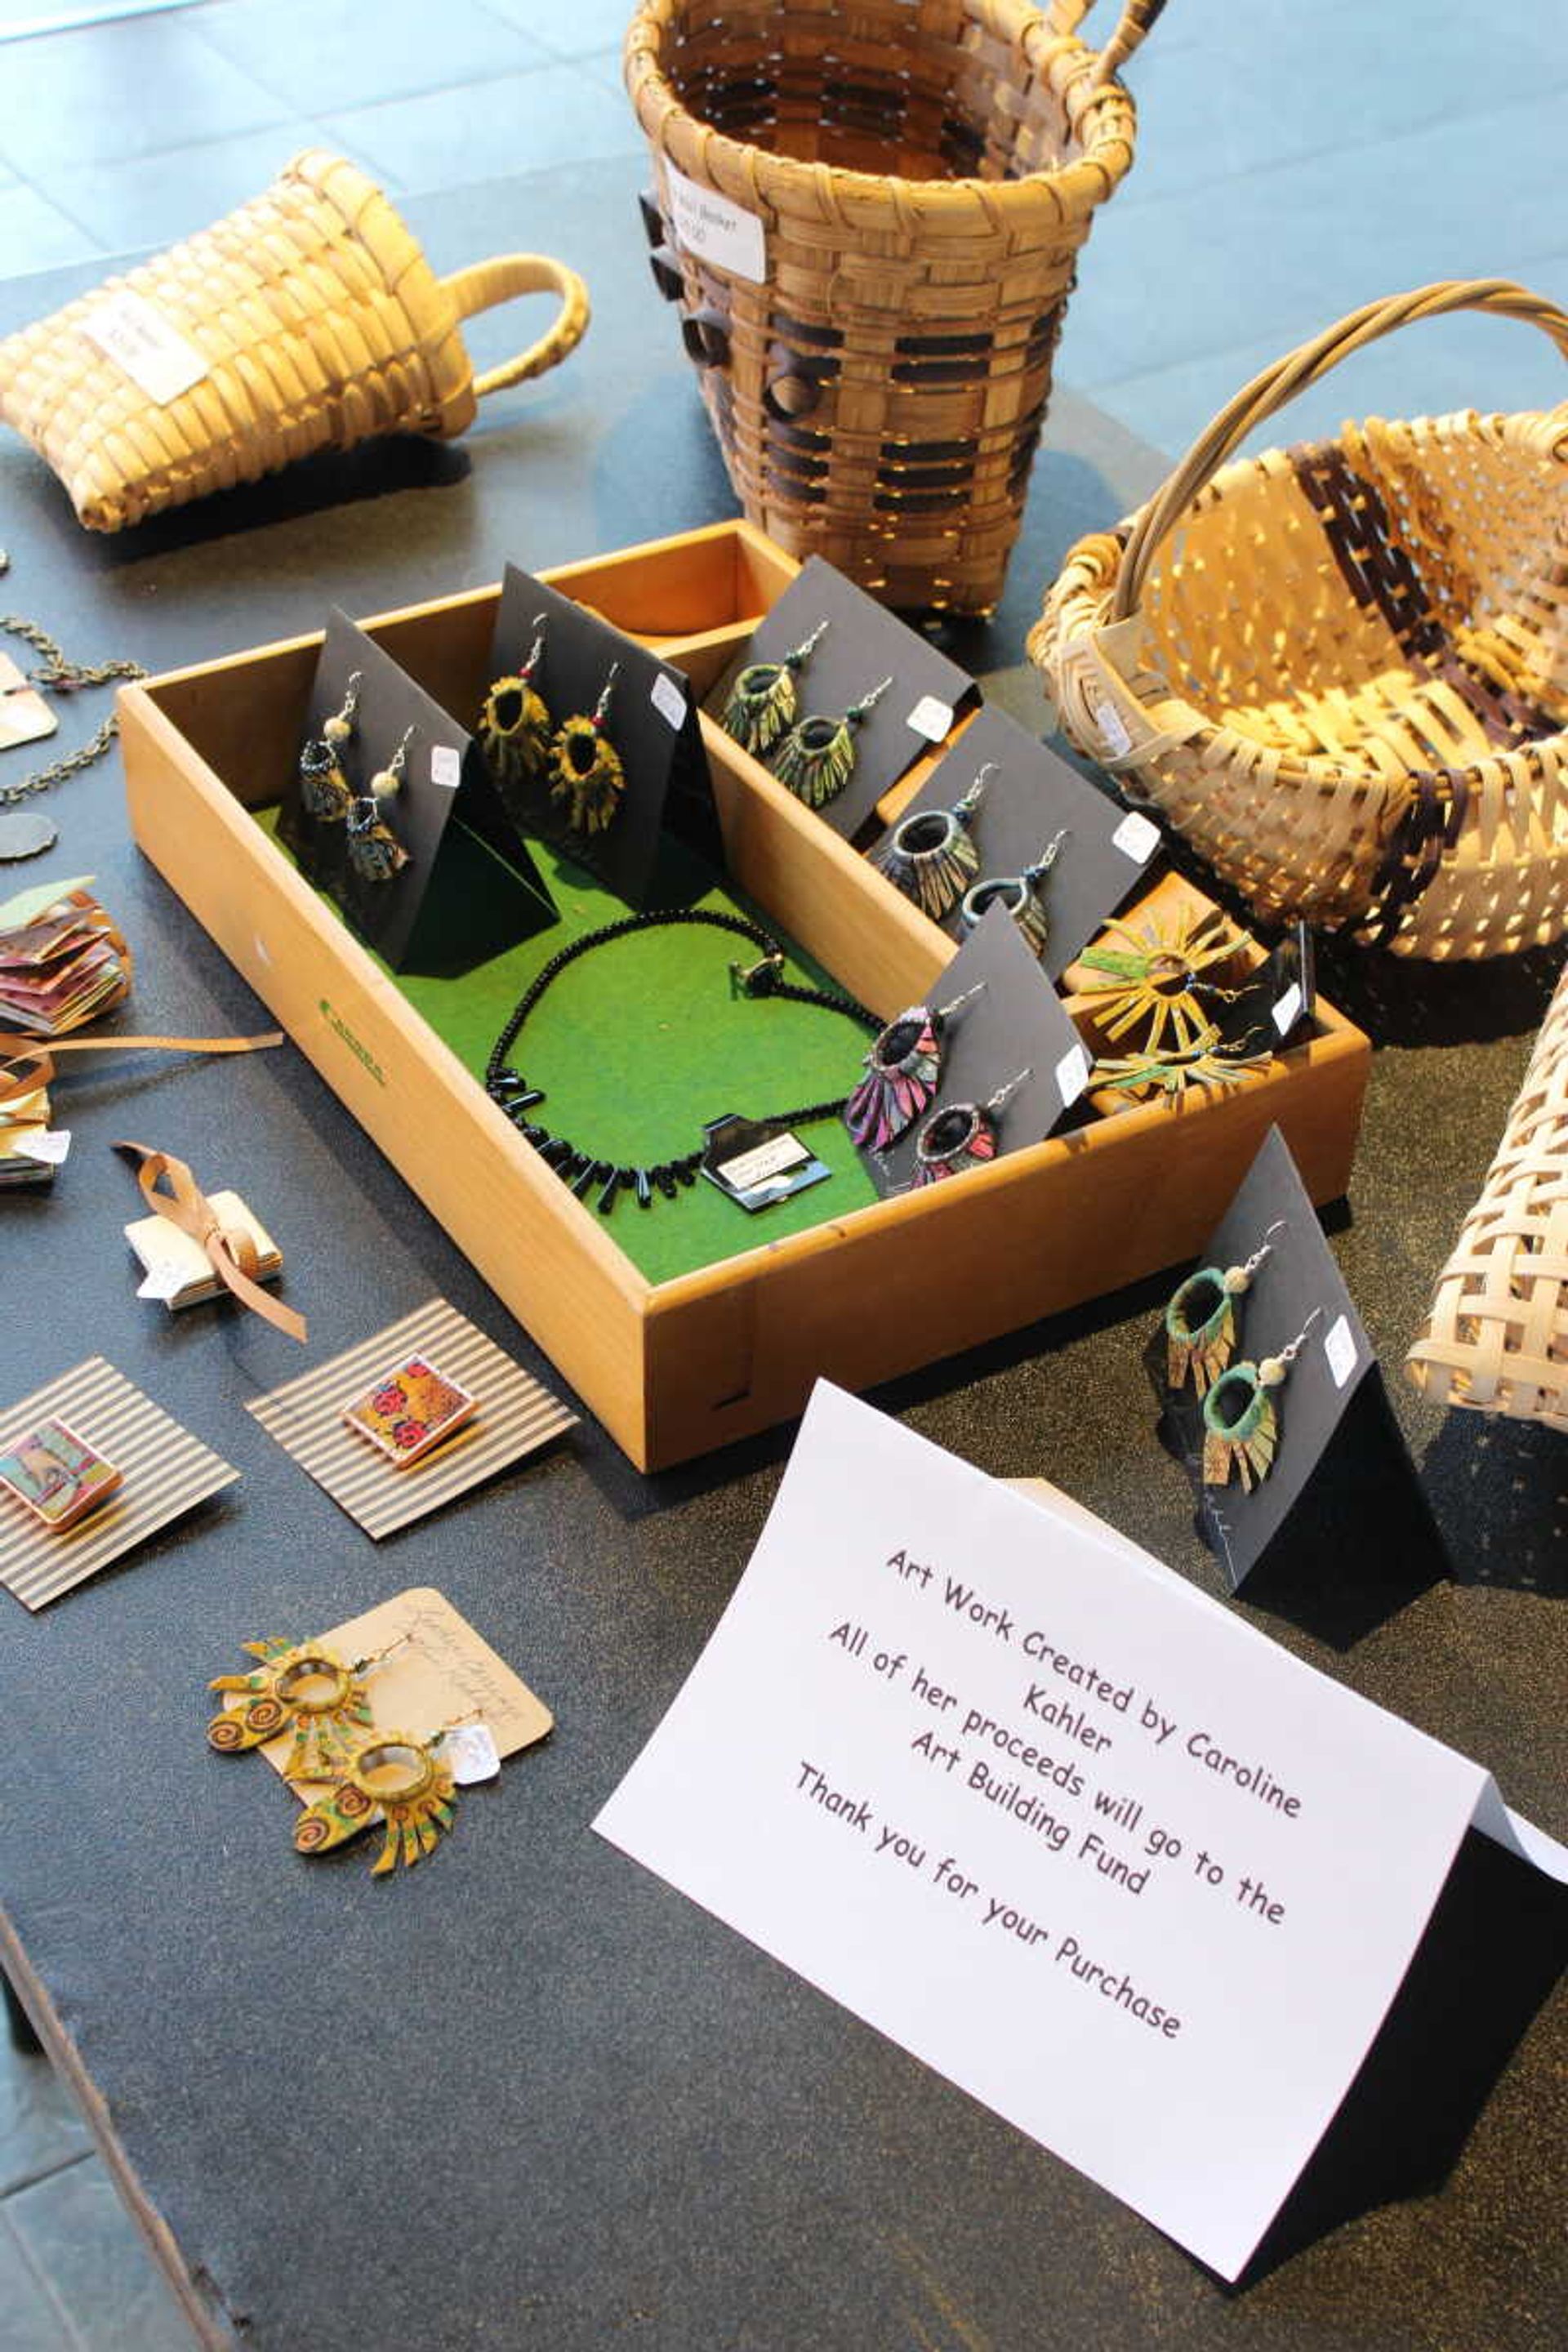 Jewelry and baskets for sale by artist Caroline Kahler at Southeast’s Art Guild Annual Show and Sale on Nov. 16.